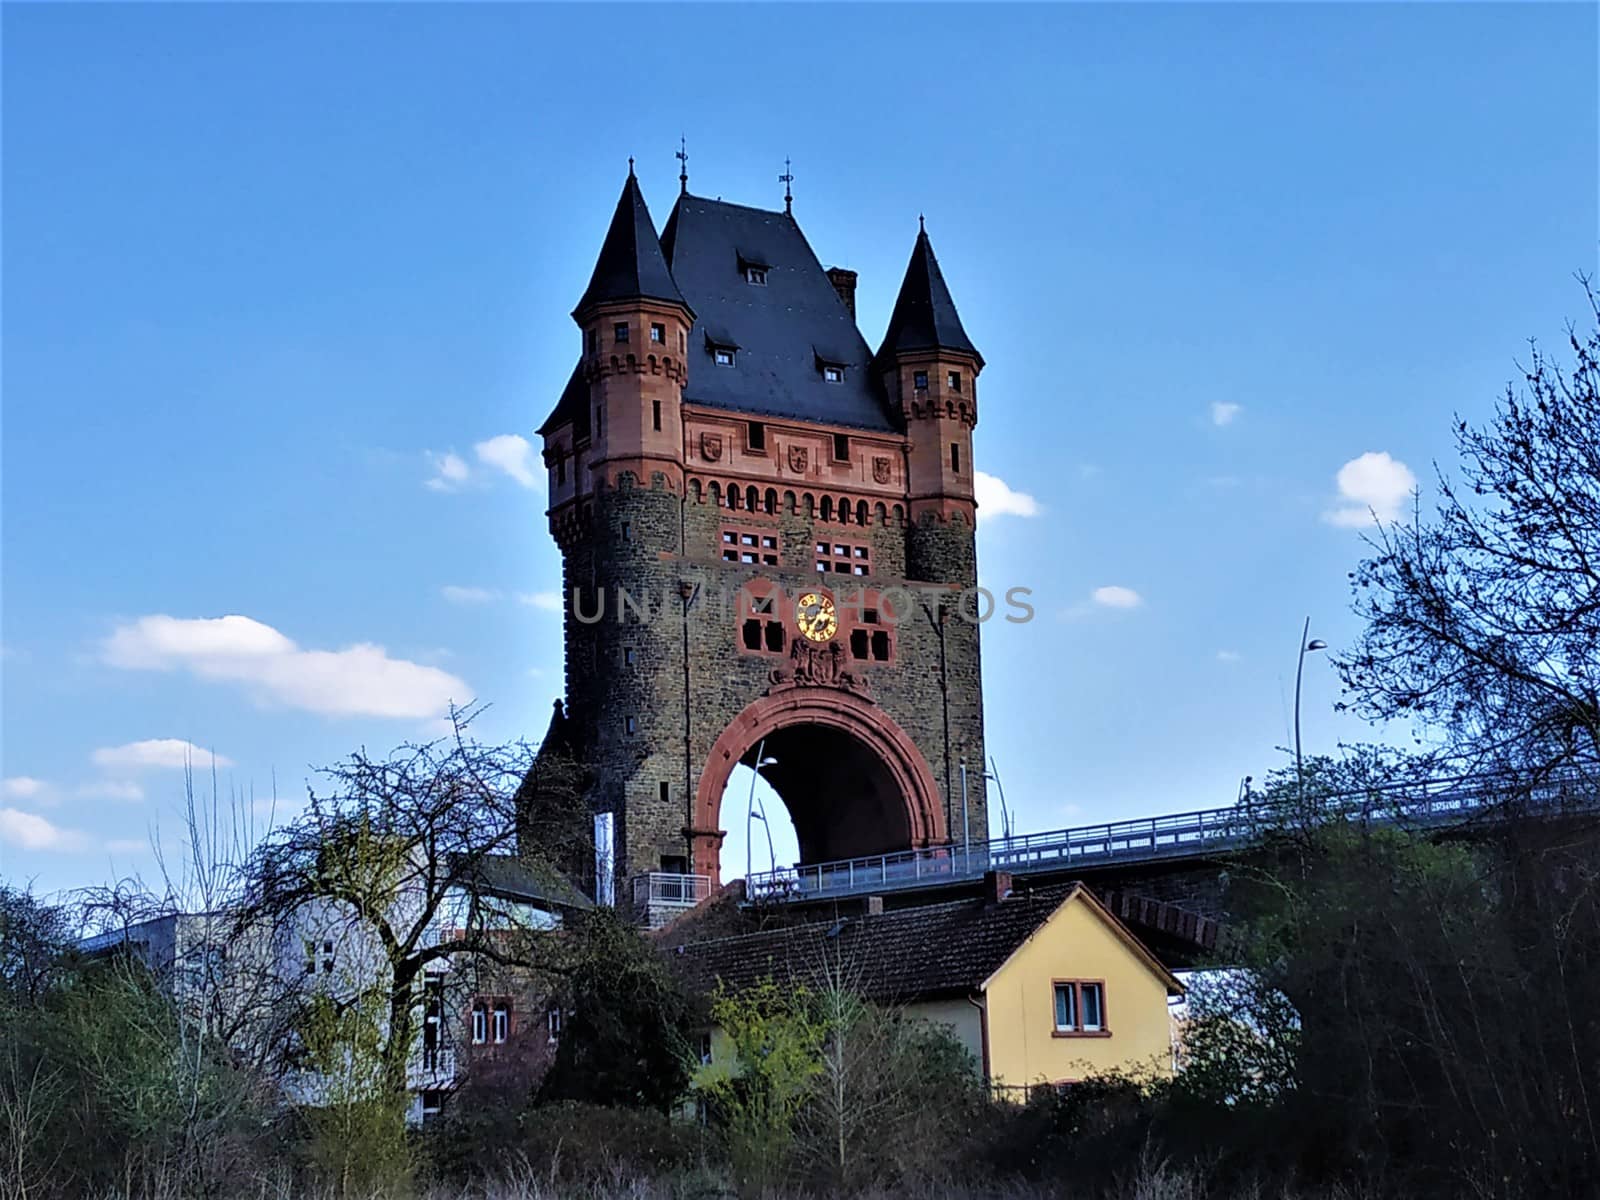 The Nibelung Bridge in Worms with the Nibelung Tower by pisces2386